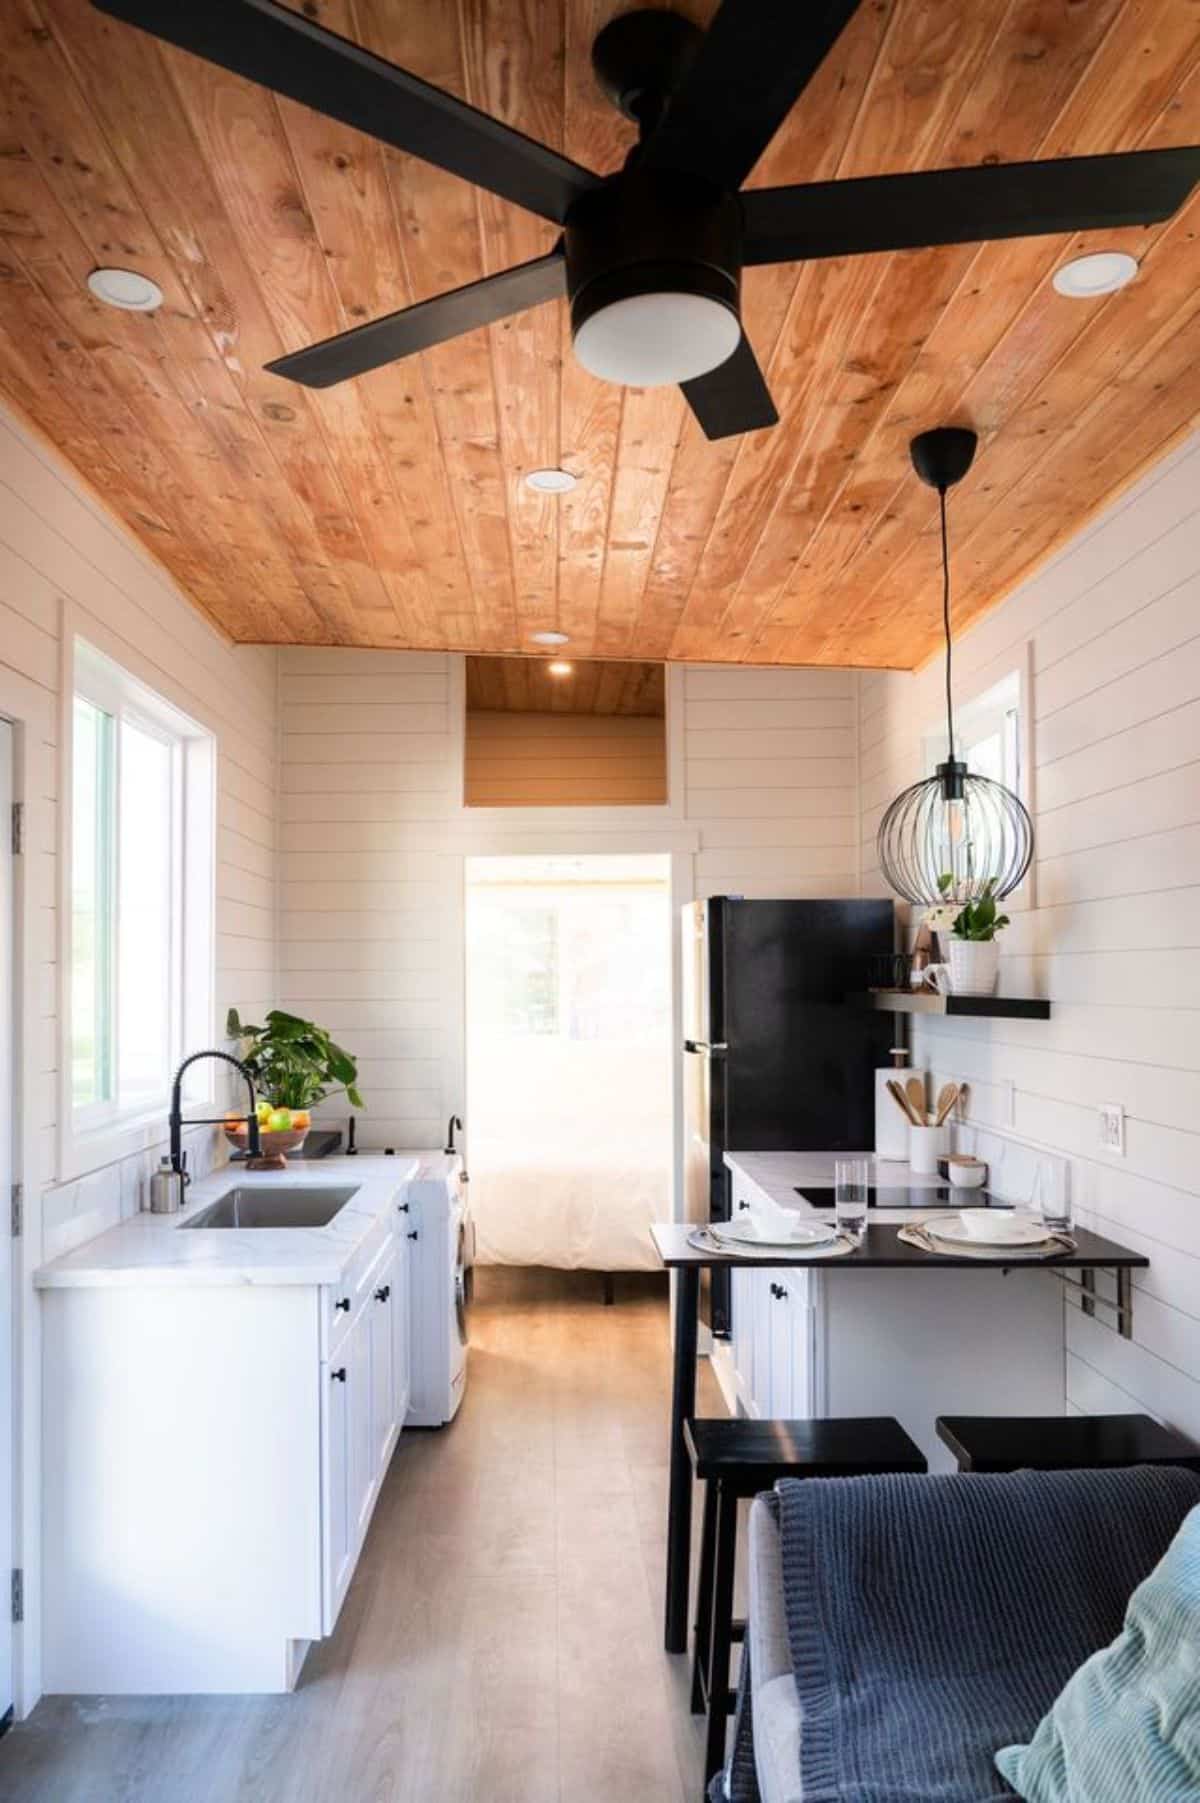 Living area of tiny house in Canada